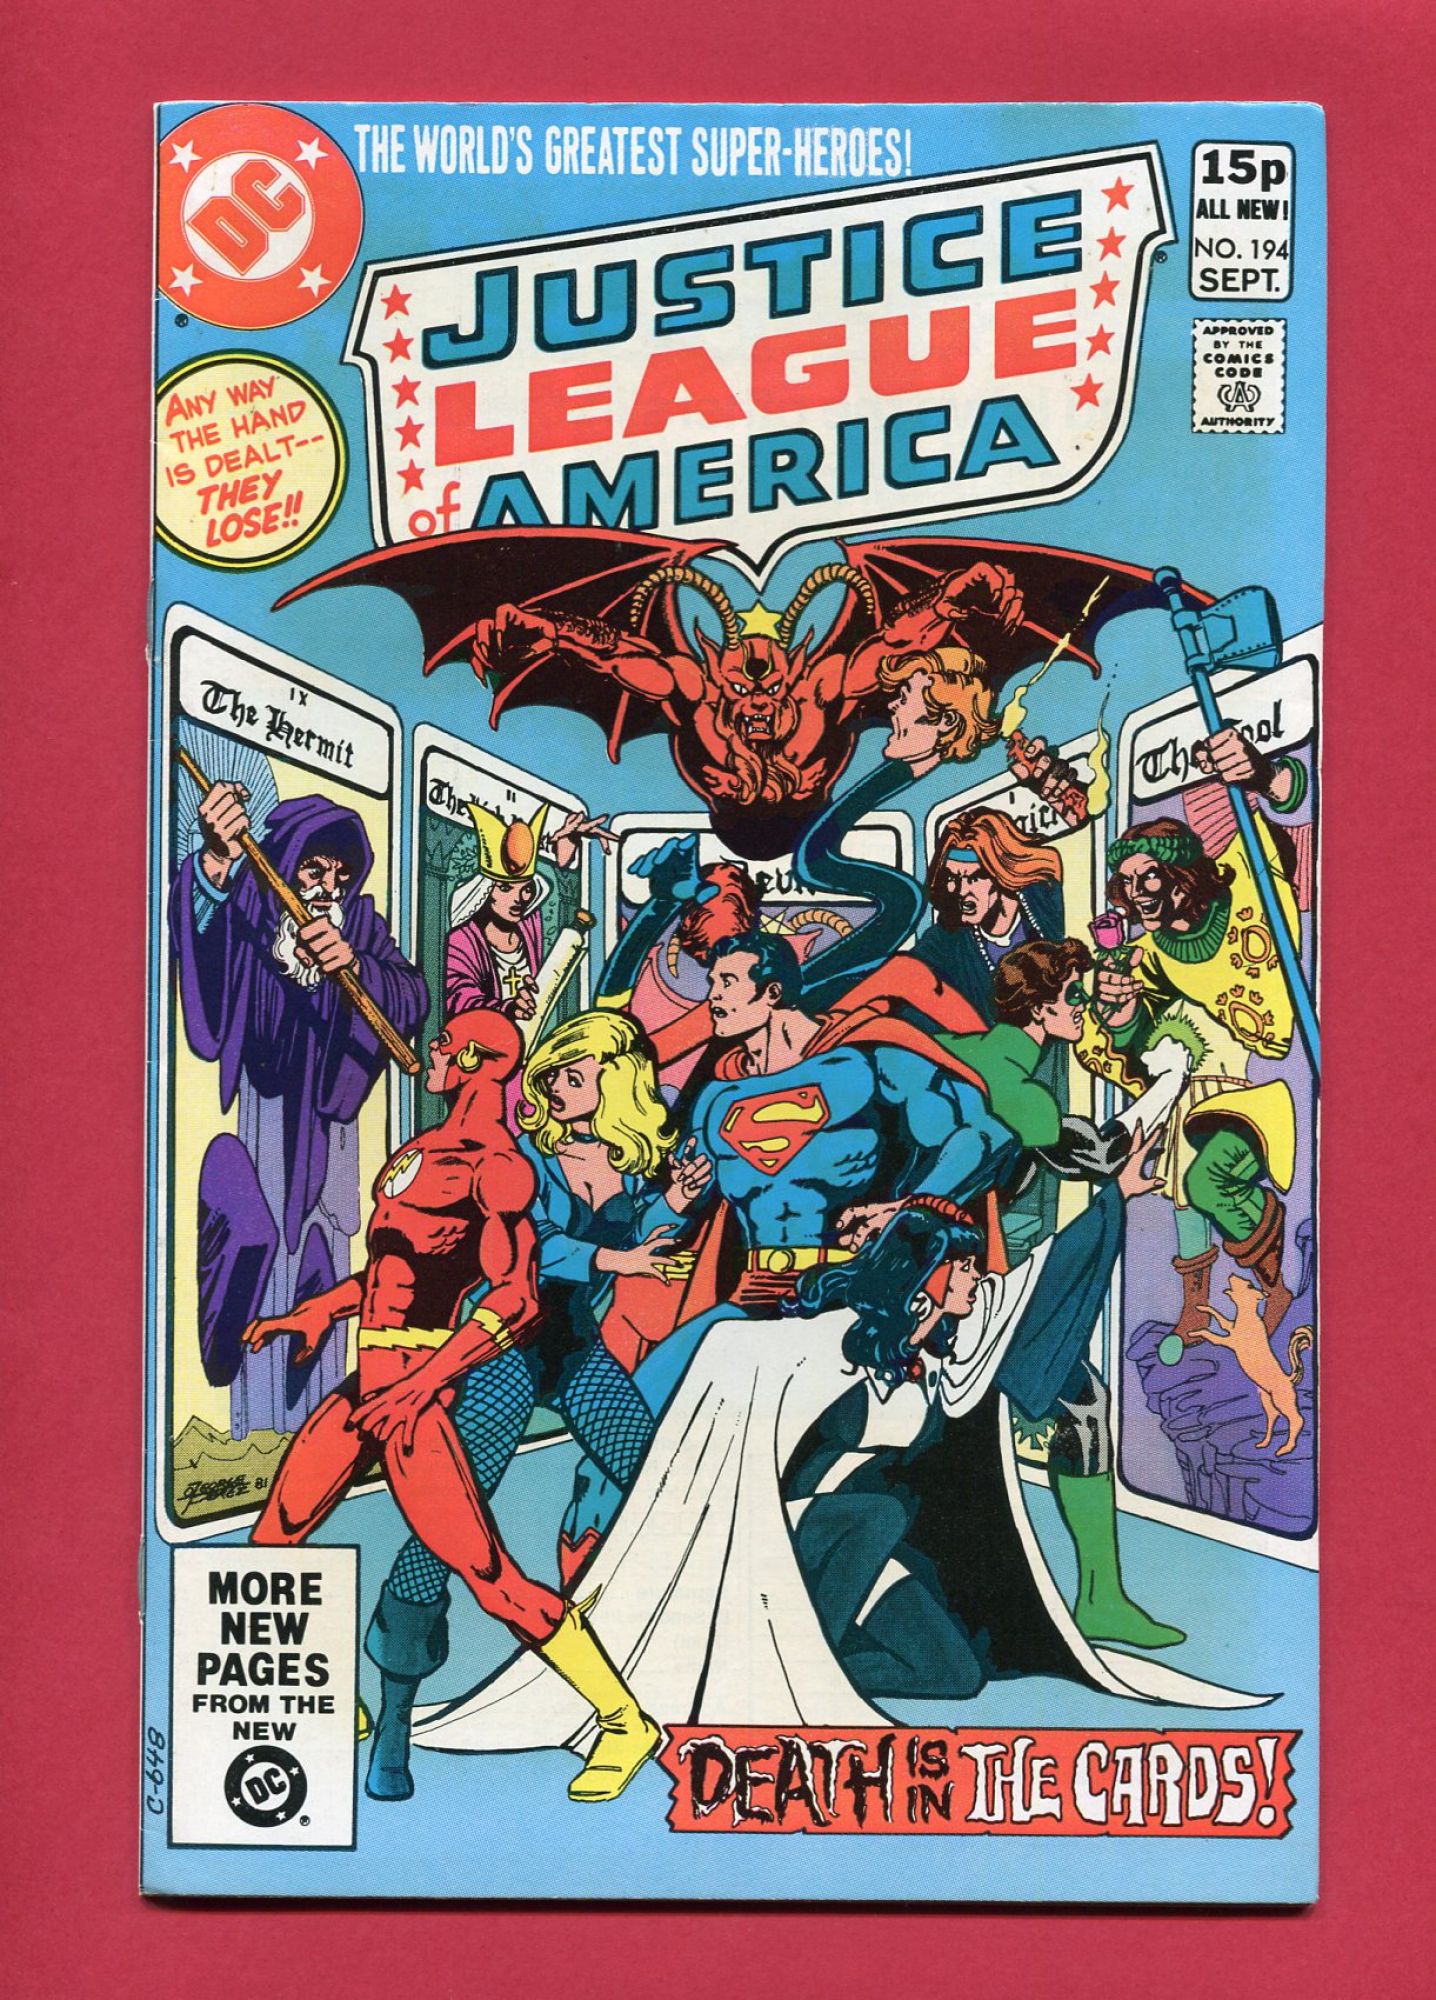 Justice League of America #194, Sep 1981, 8.0 VF